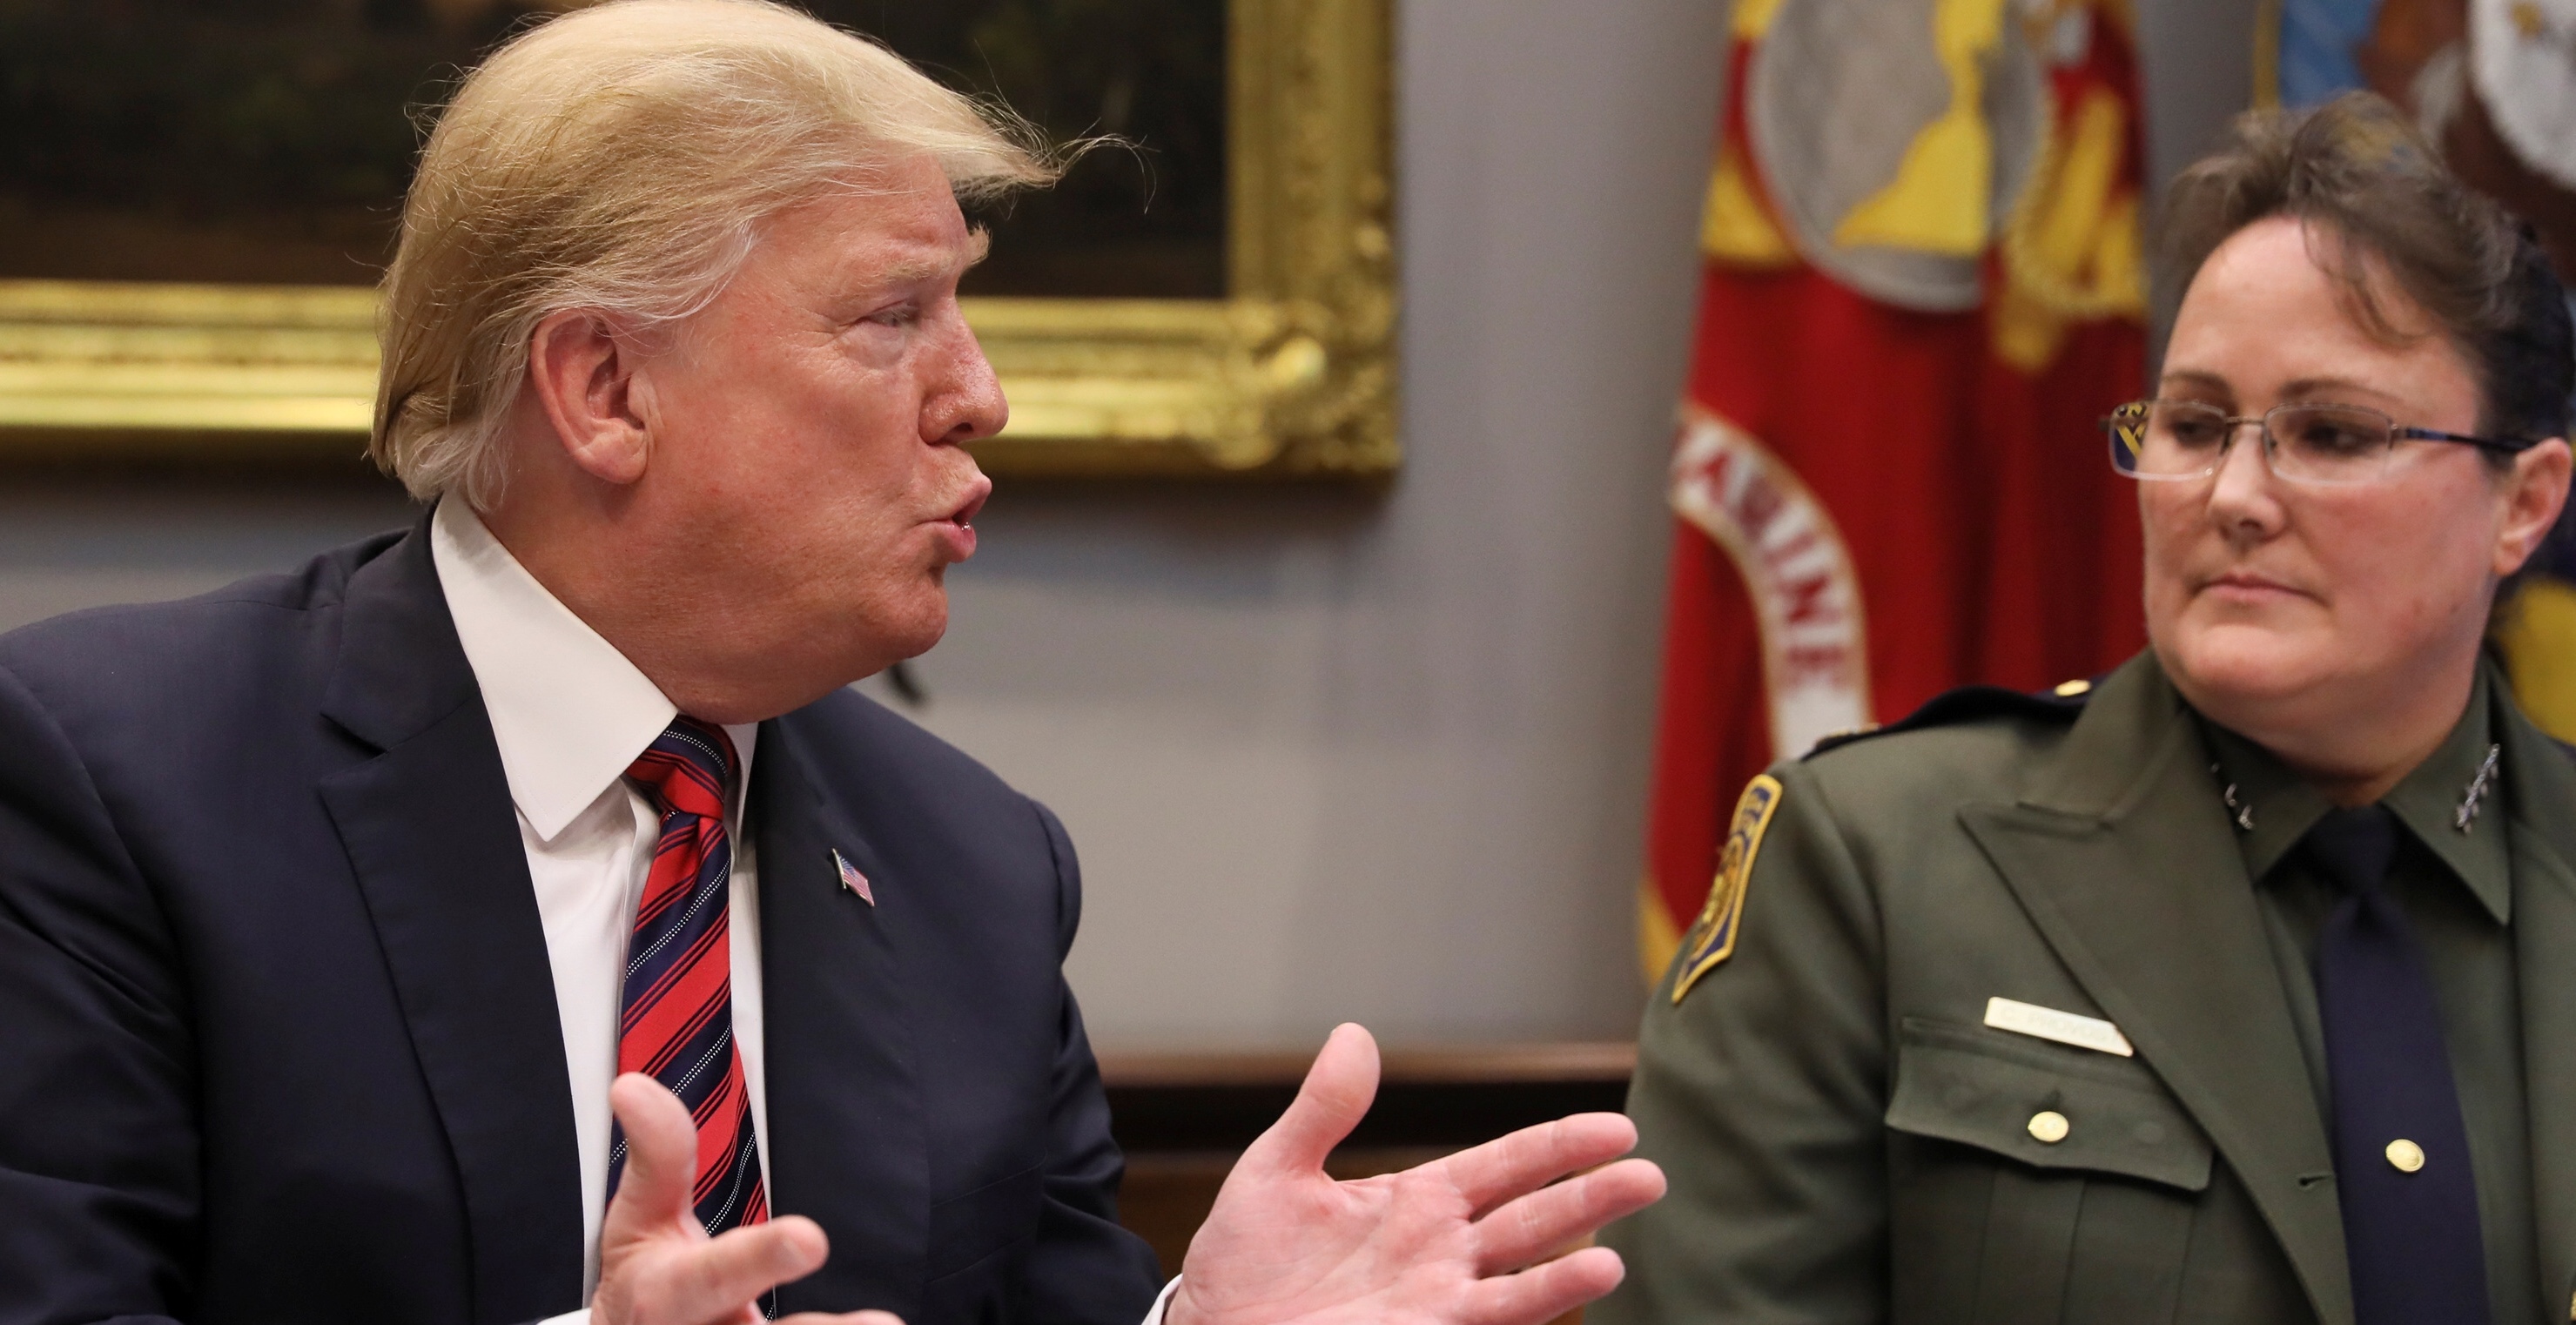 U.S. President Donald Trump speaks next to Chief of U.S. Border Patrol Carla Provost during a briefing on "drug trafficking on the southern border" in the Roosevelt Room at the White House in Washington, U.S., March 13, 2019. REUTERS/Jonathan Ernst